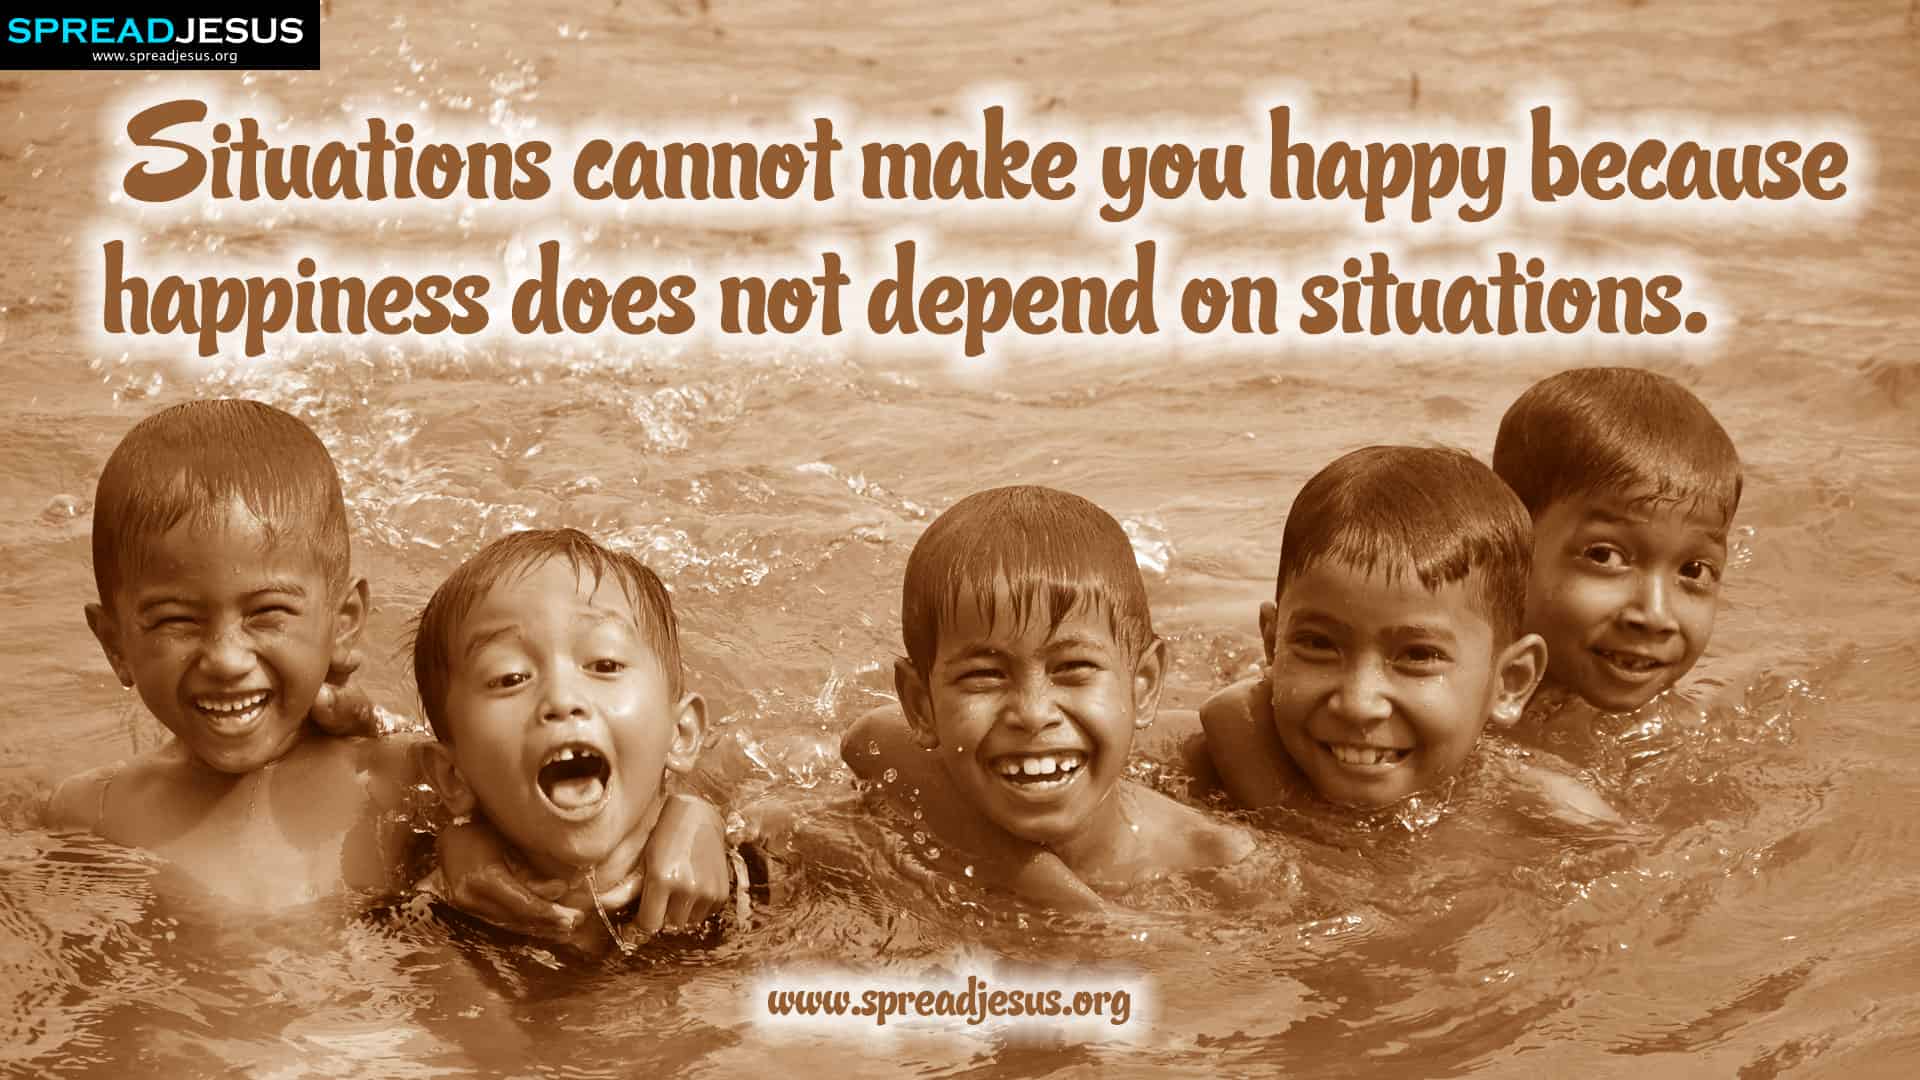 Обои make you Happy. Wallpaper makes you Happy. Happiness quotes. Happy situation. Cannot make it